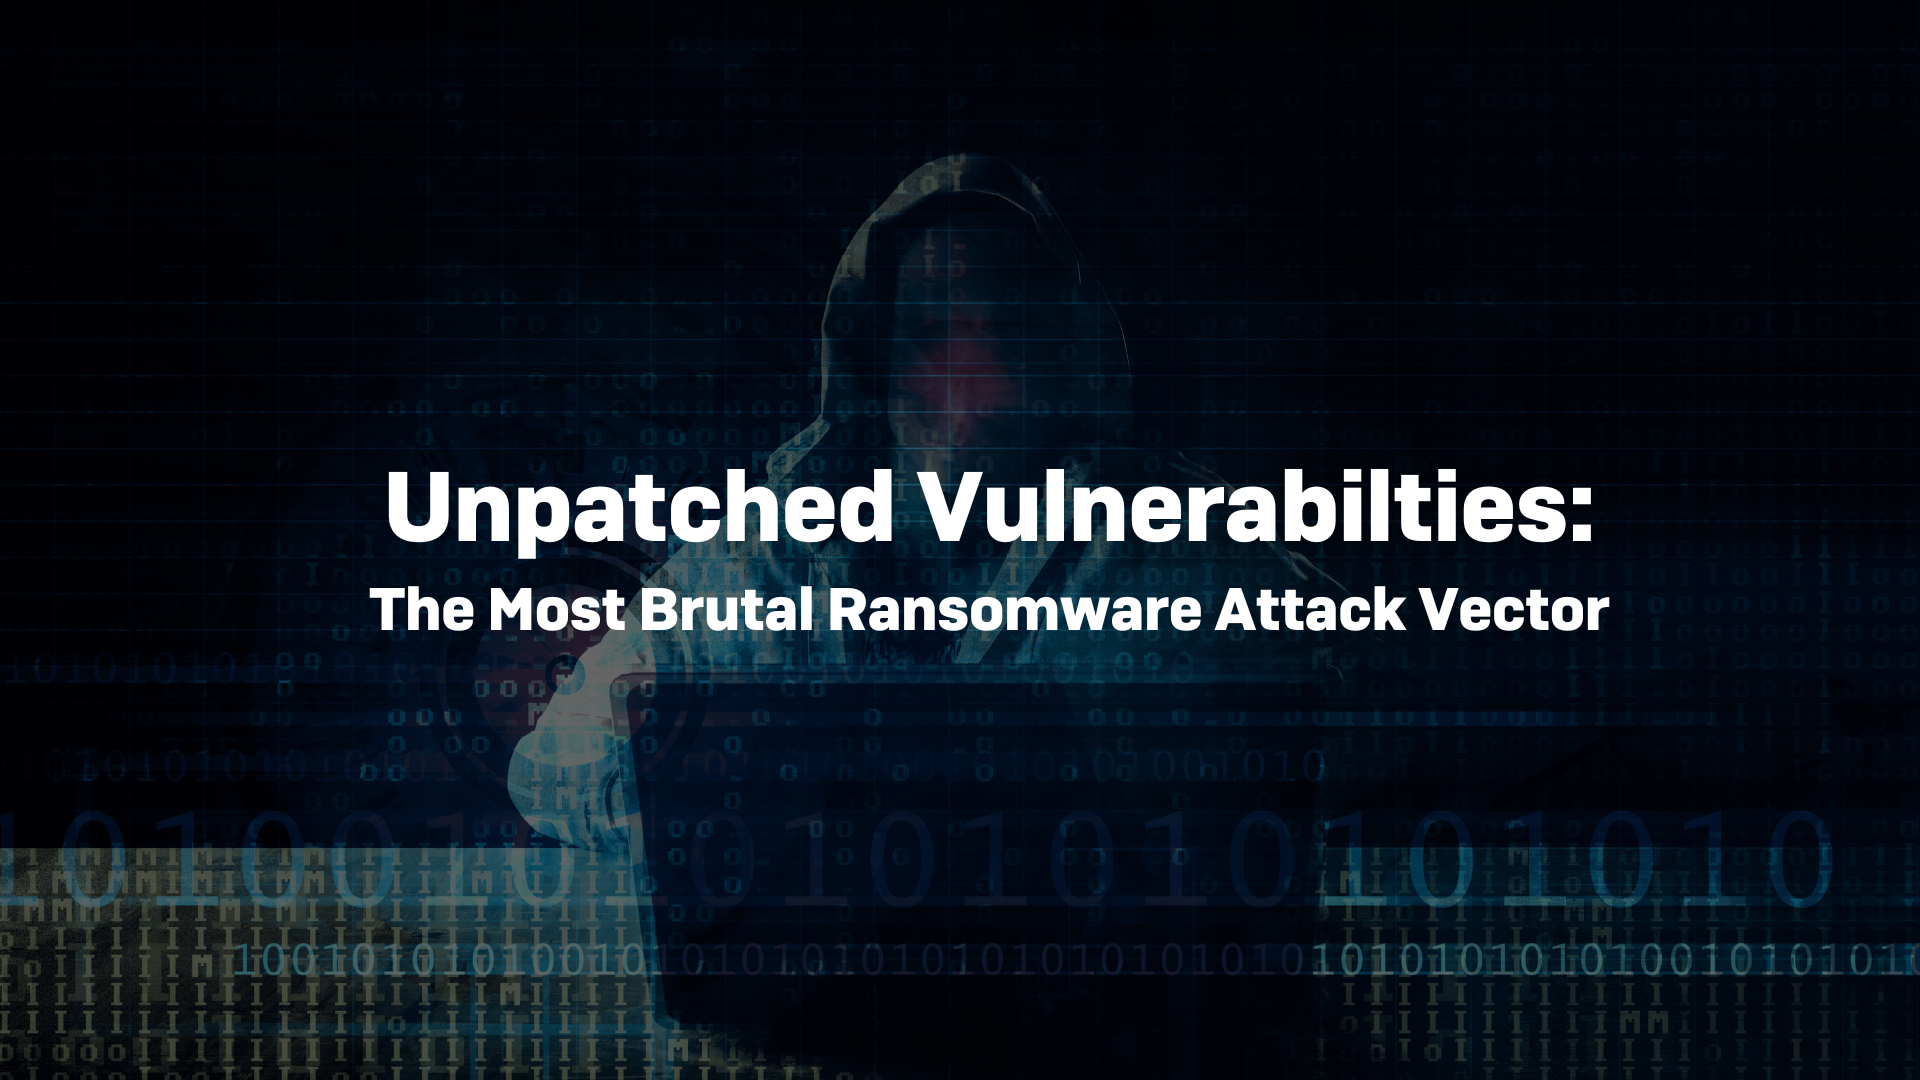 Unpatched Vulnerabilities: The Most Brutal Ransomware Attack Vector